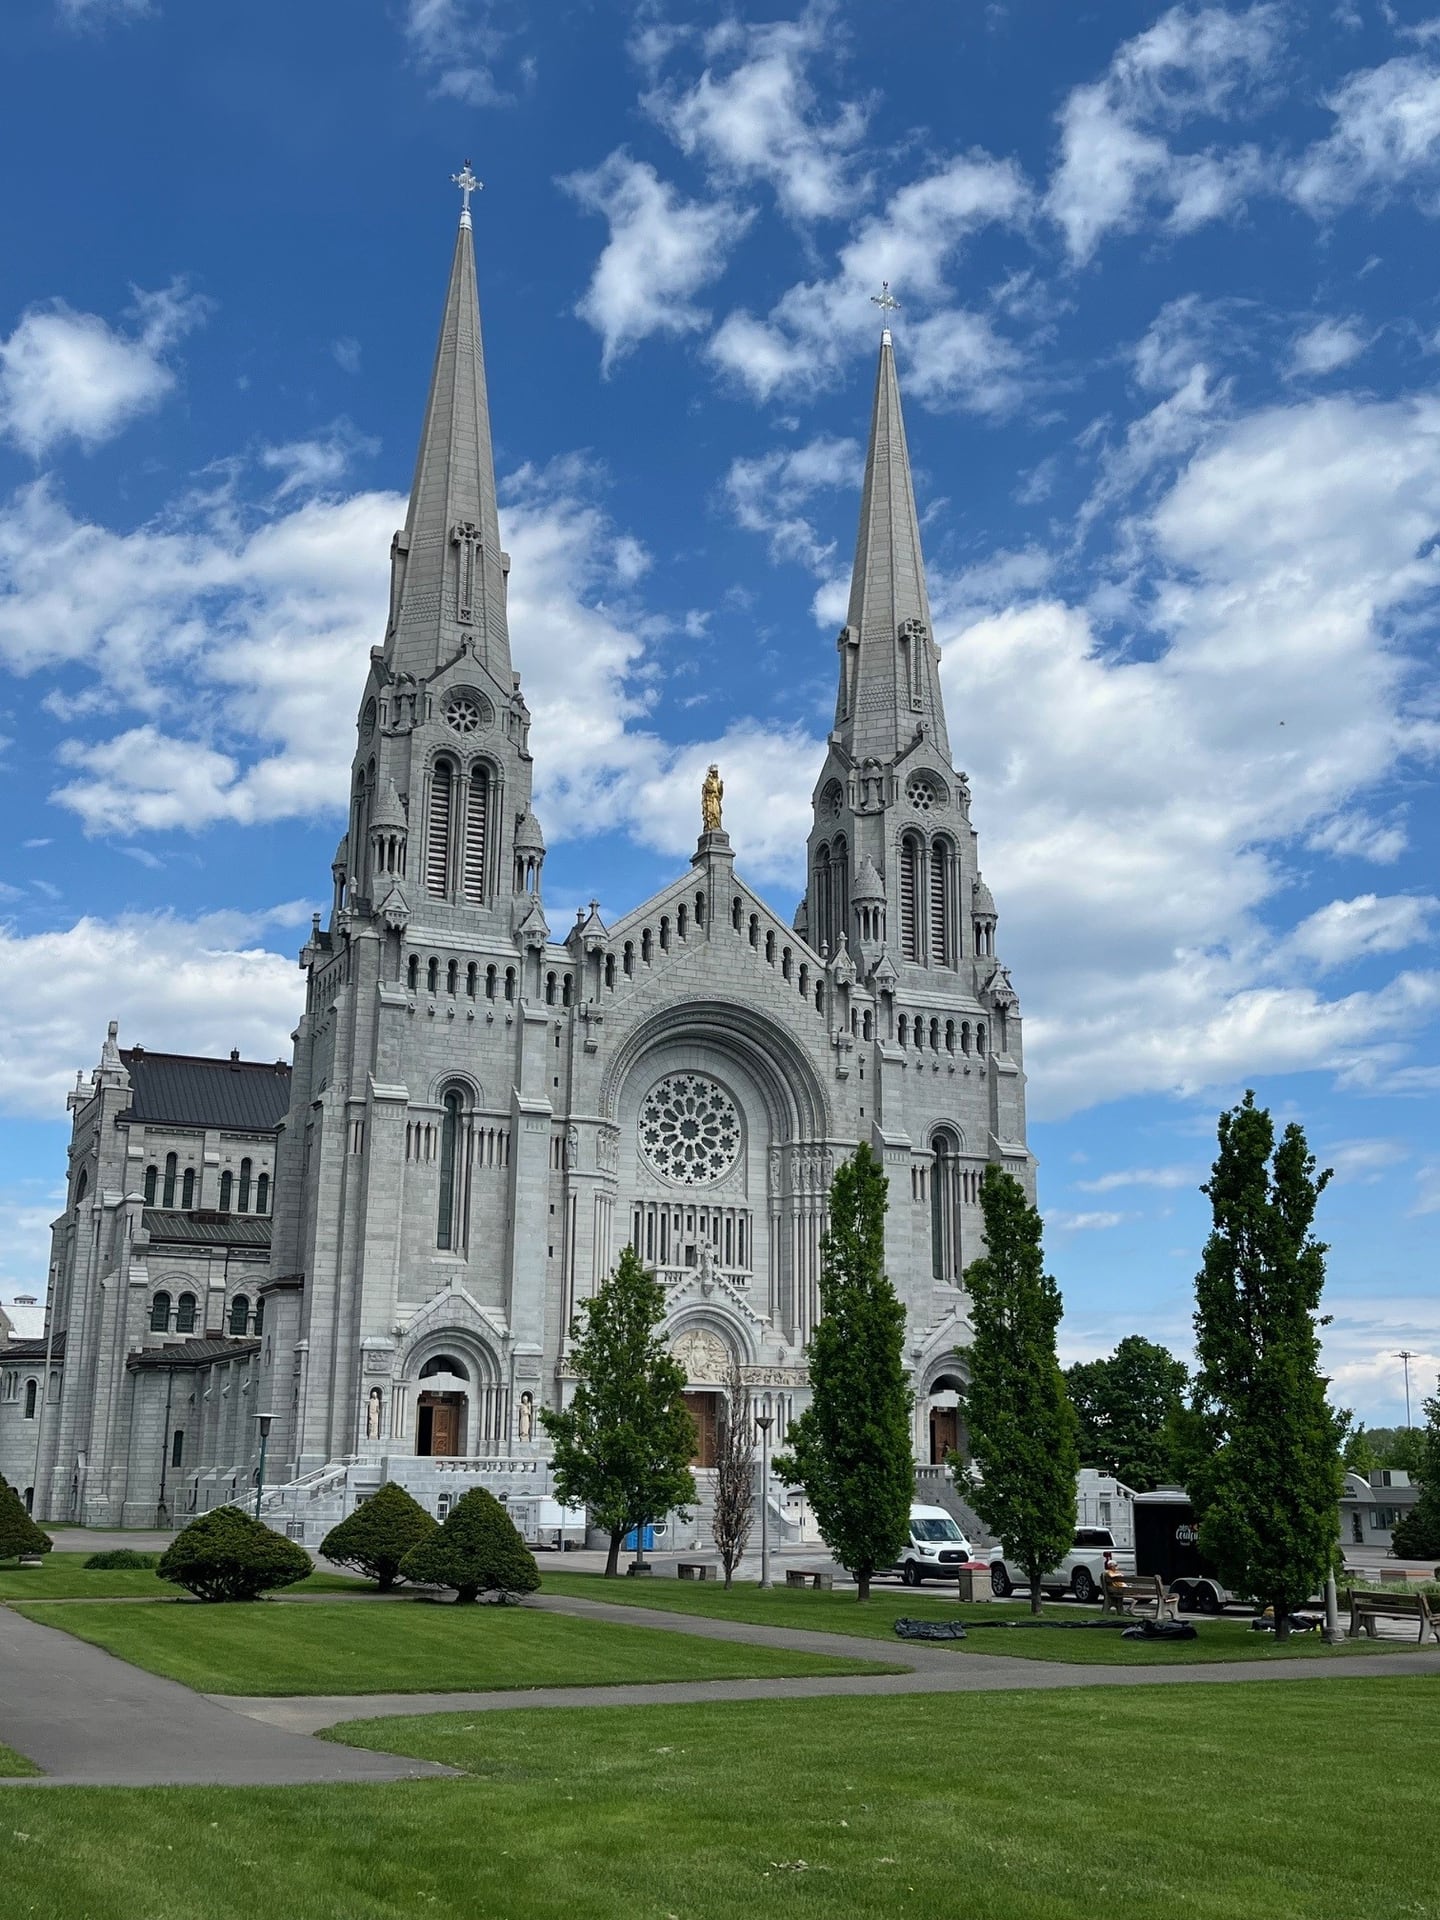 The Basilica of Sainte-Anne-de-Beaupre is located on the Marie-Hélène Prémont cycle route.  Across the street, cyclists can stop at the Apollo Cafe, which is also on the cycle path.